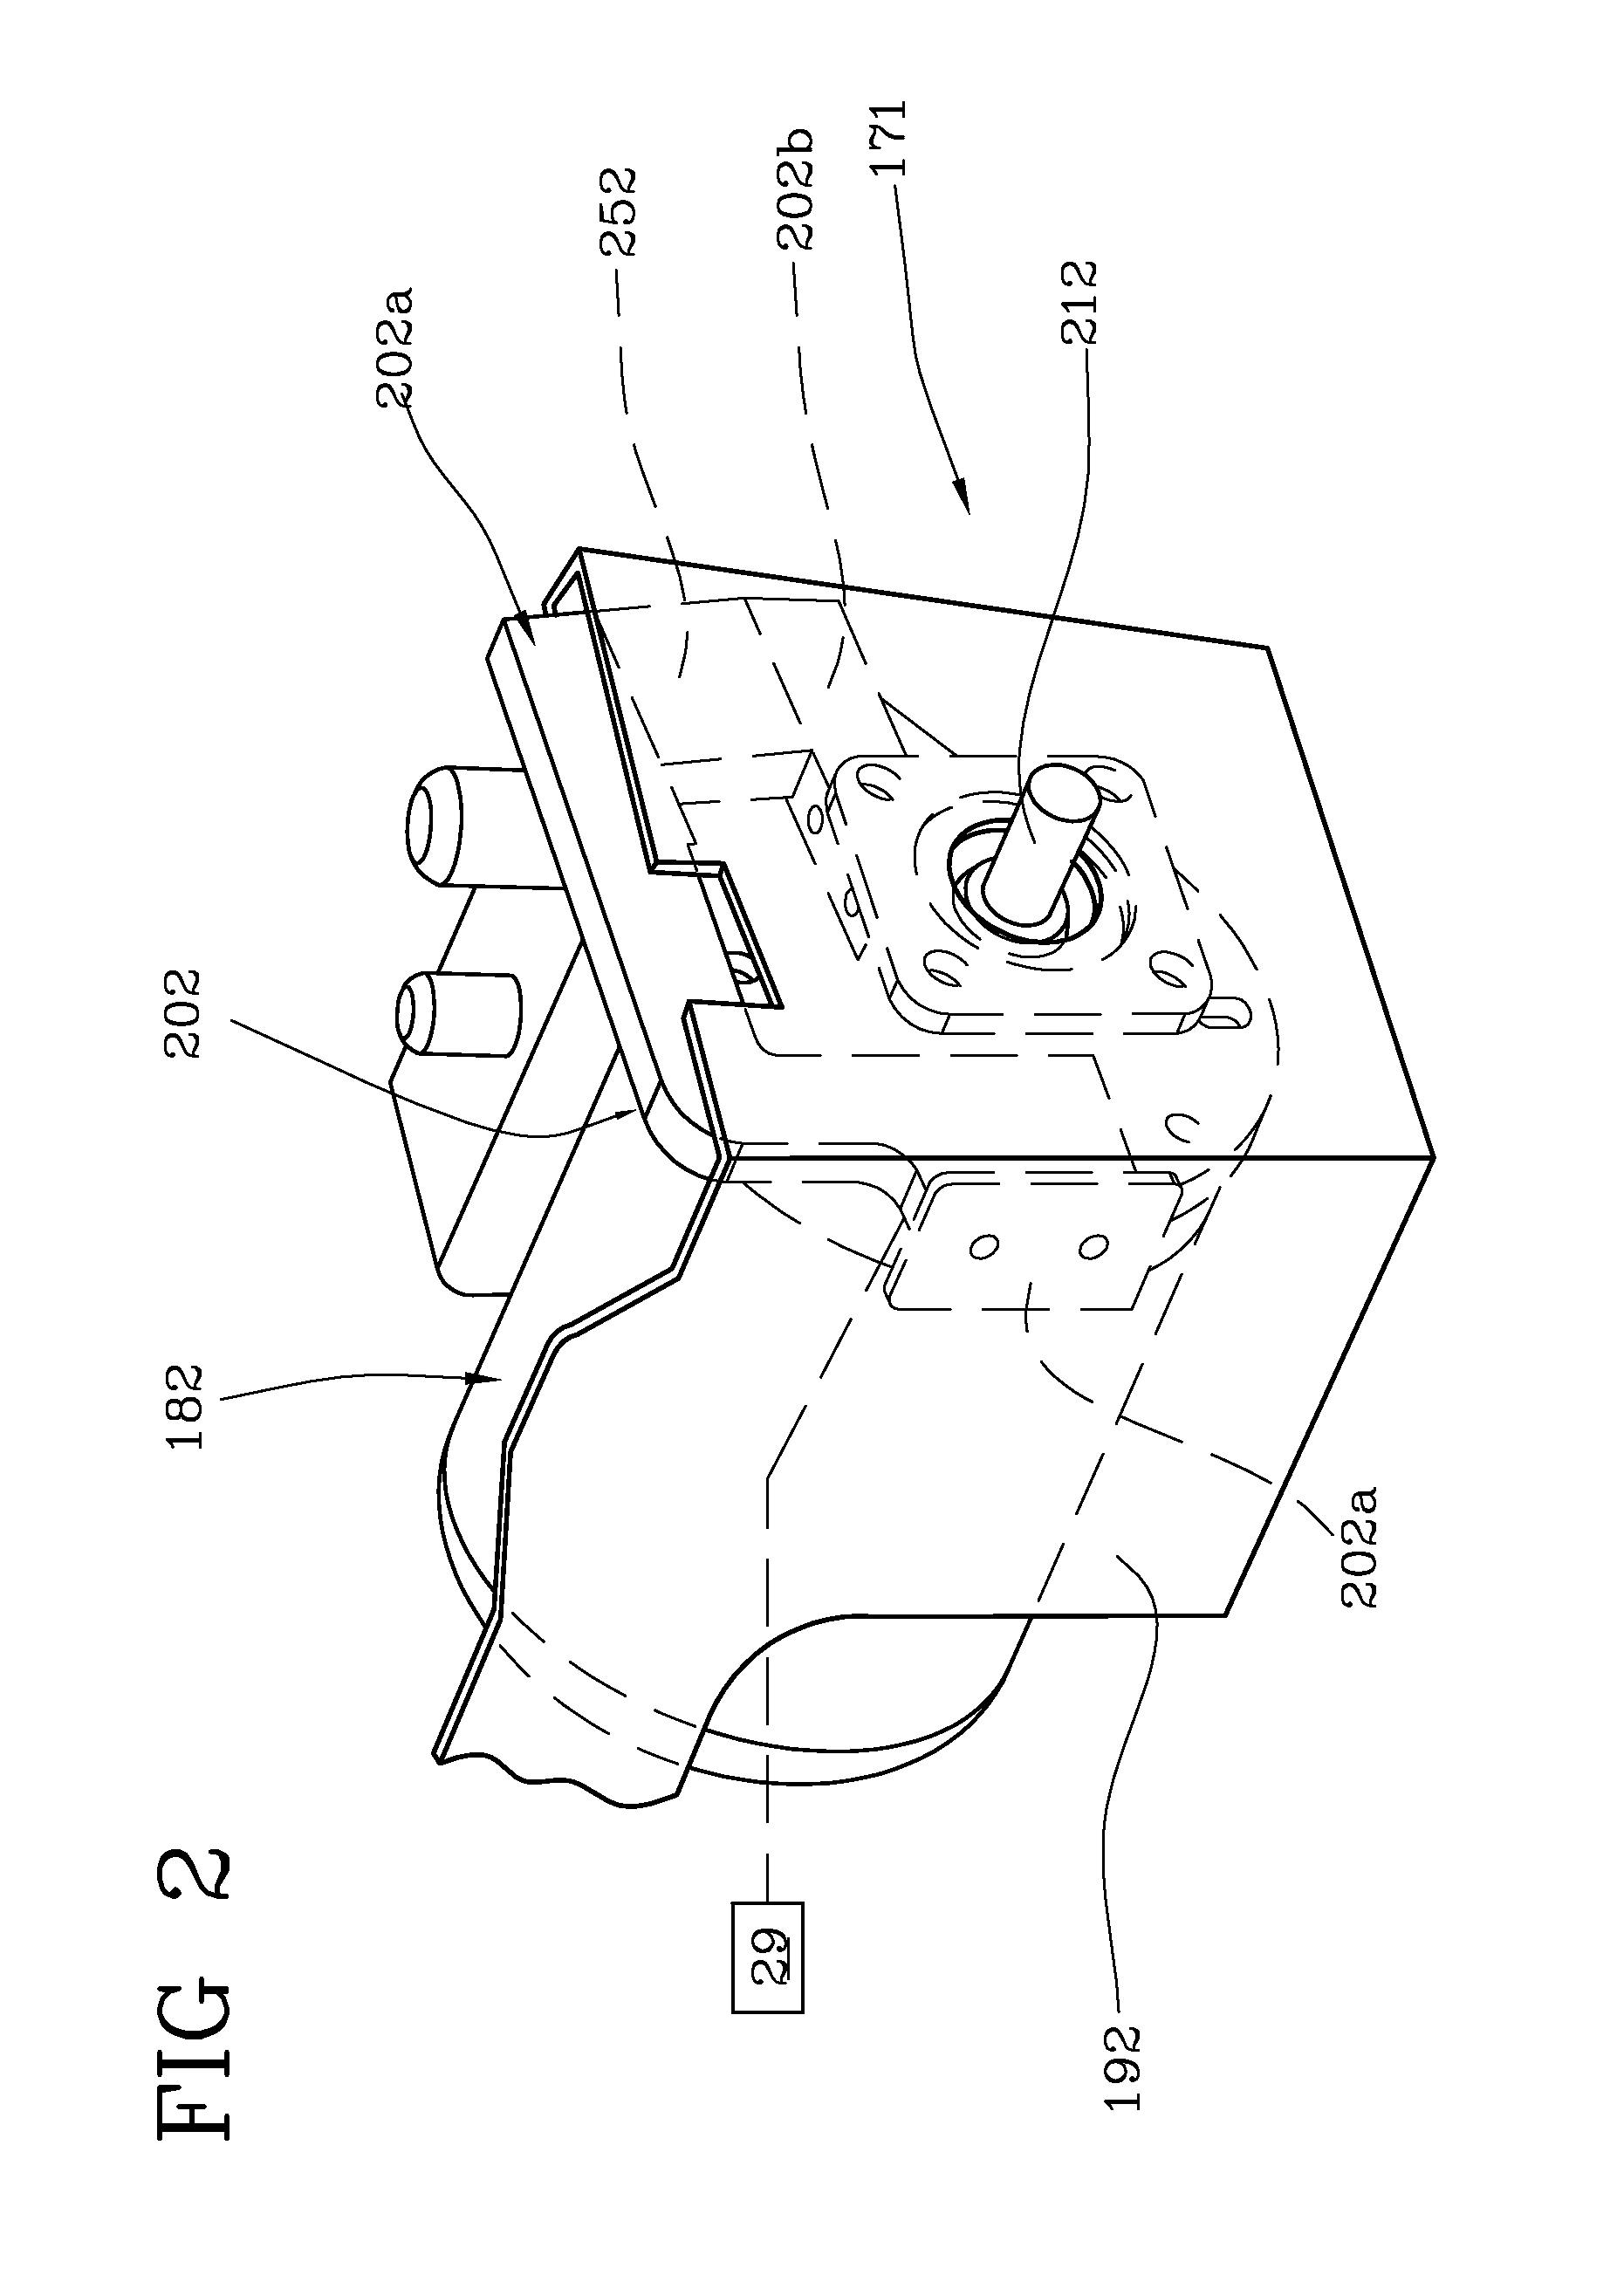 Apparatus and method for mounting and removing tyres on and from respective wheel rims